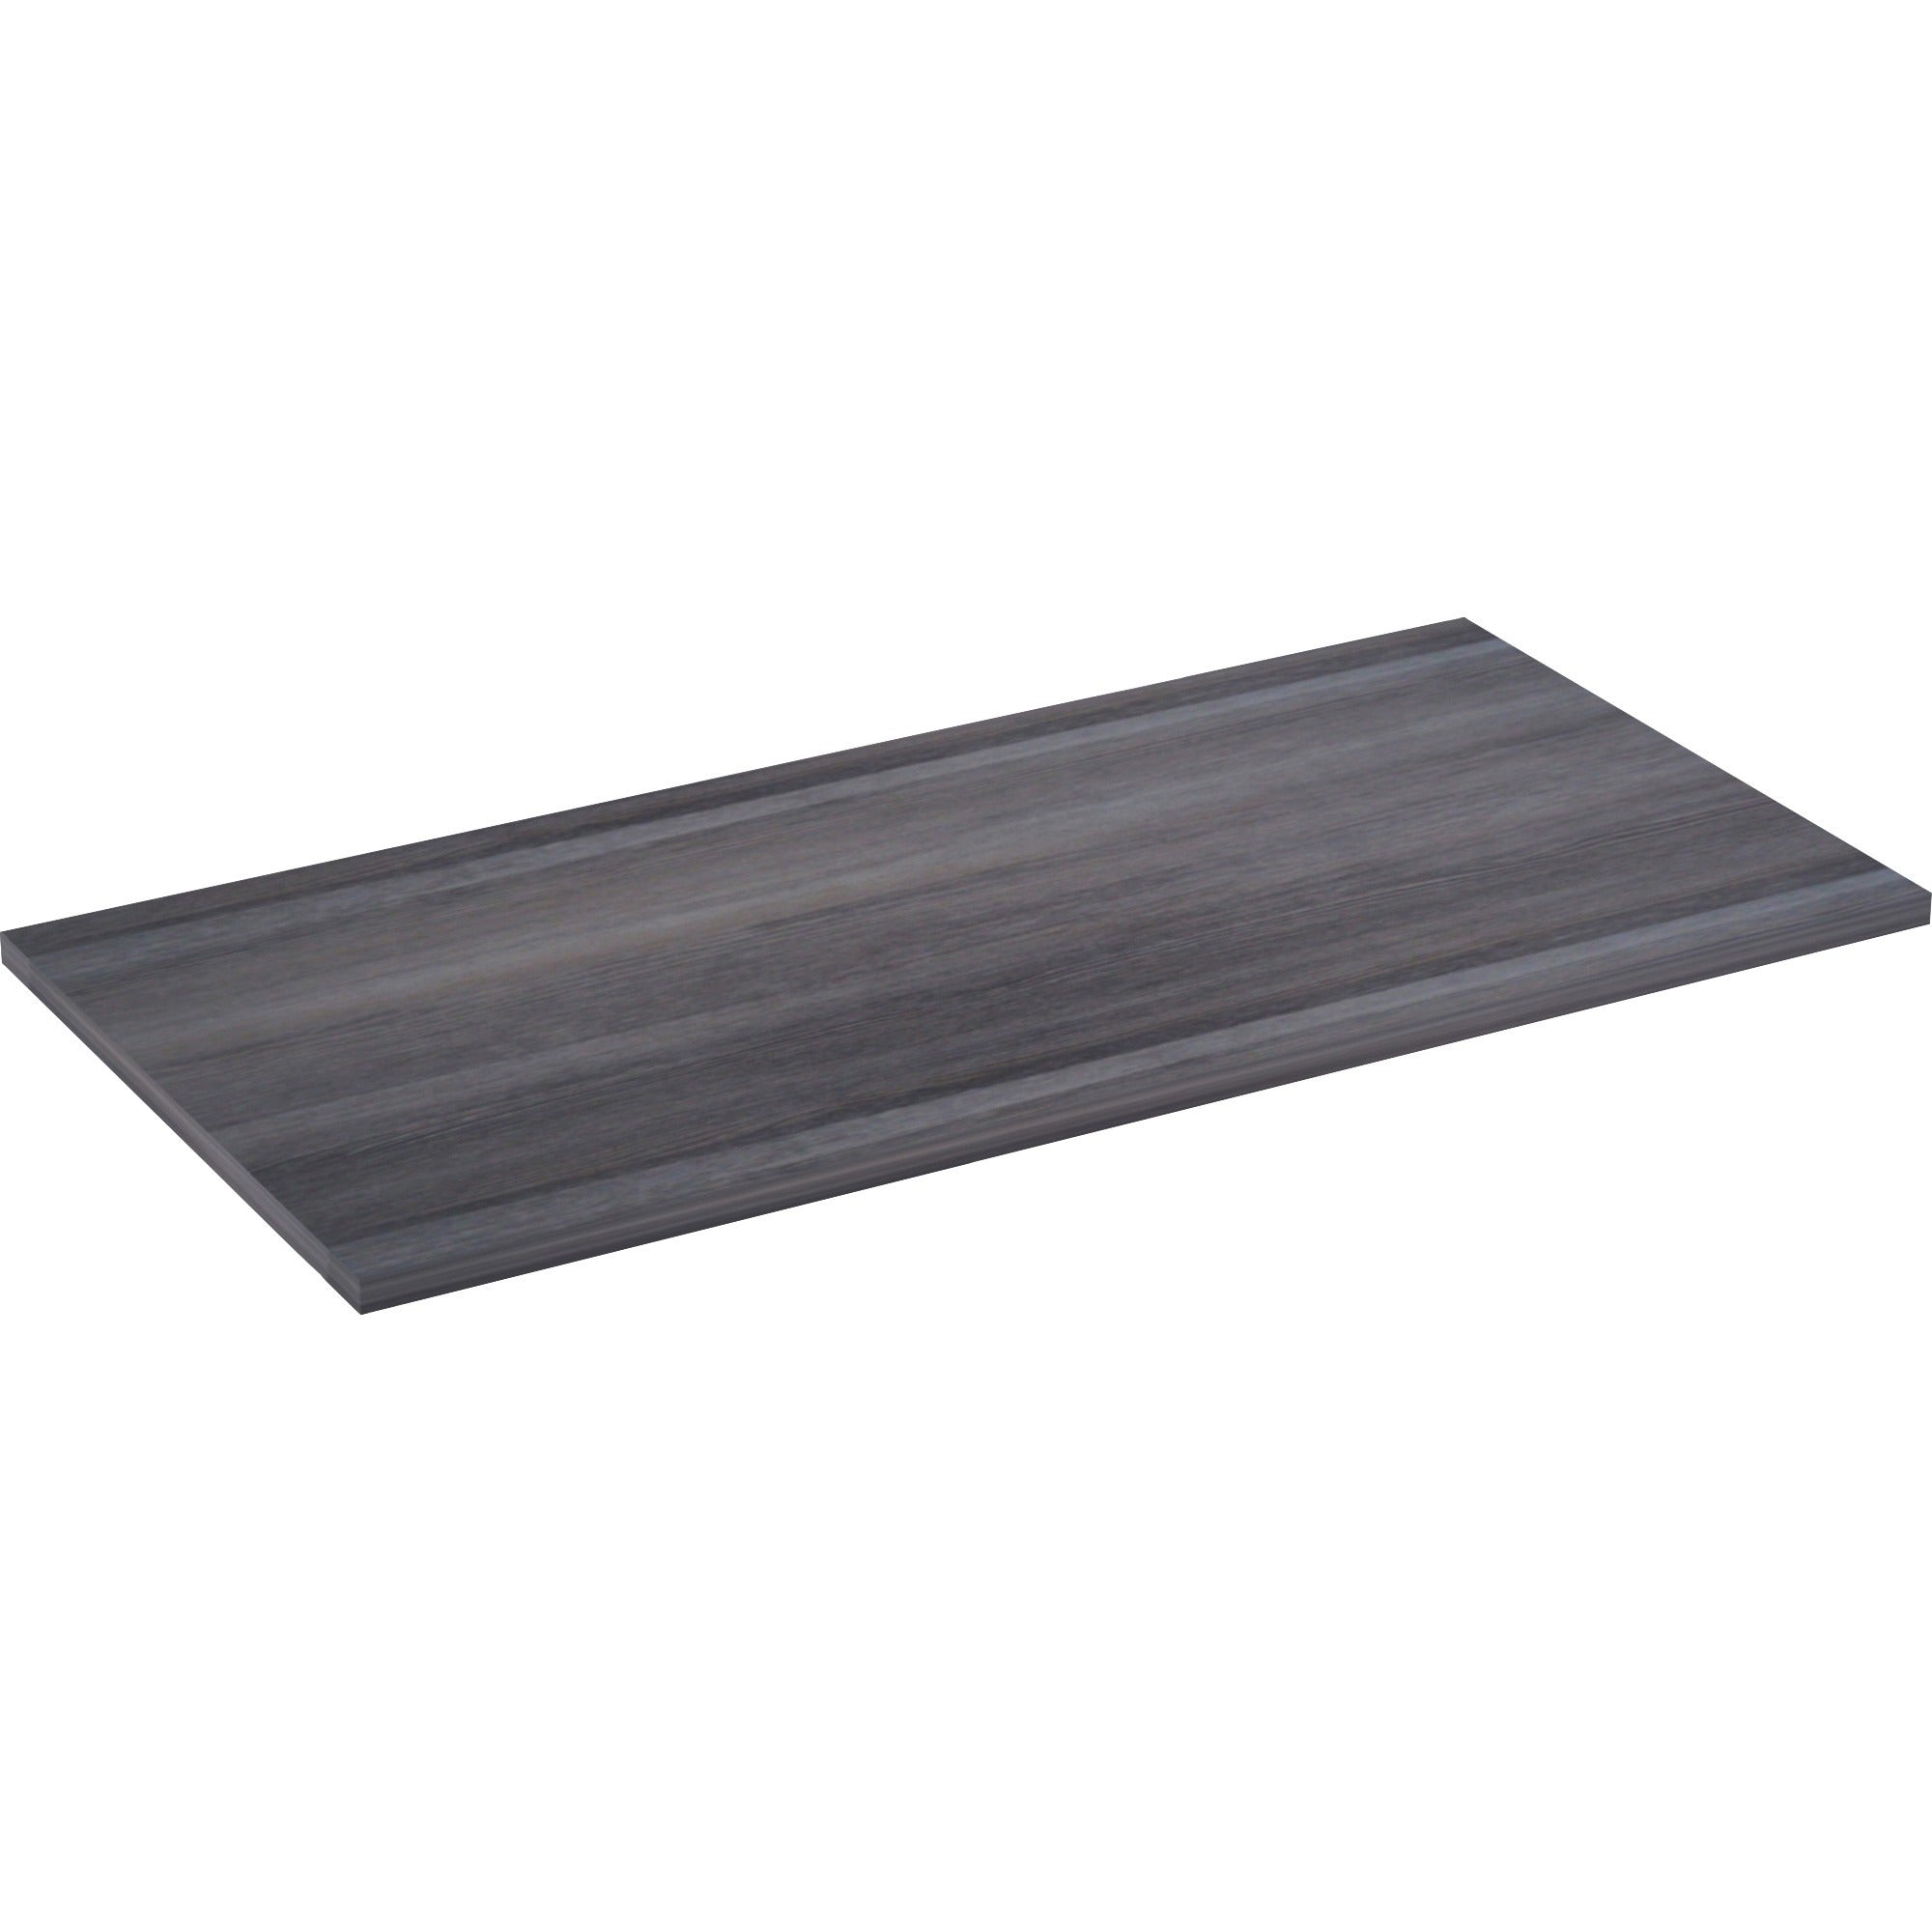 lorell-relevance-series-tabletop-476-x-236-x-1-table-top-straight-edge-finish-charcoal-laminate_llr16203 - 2